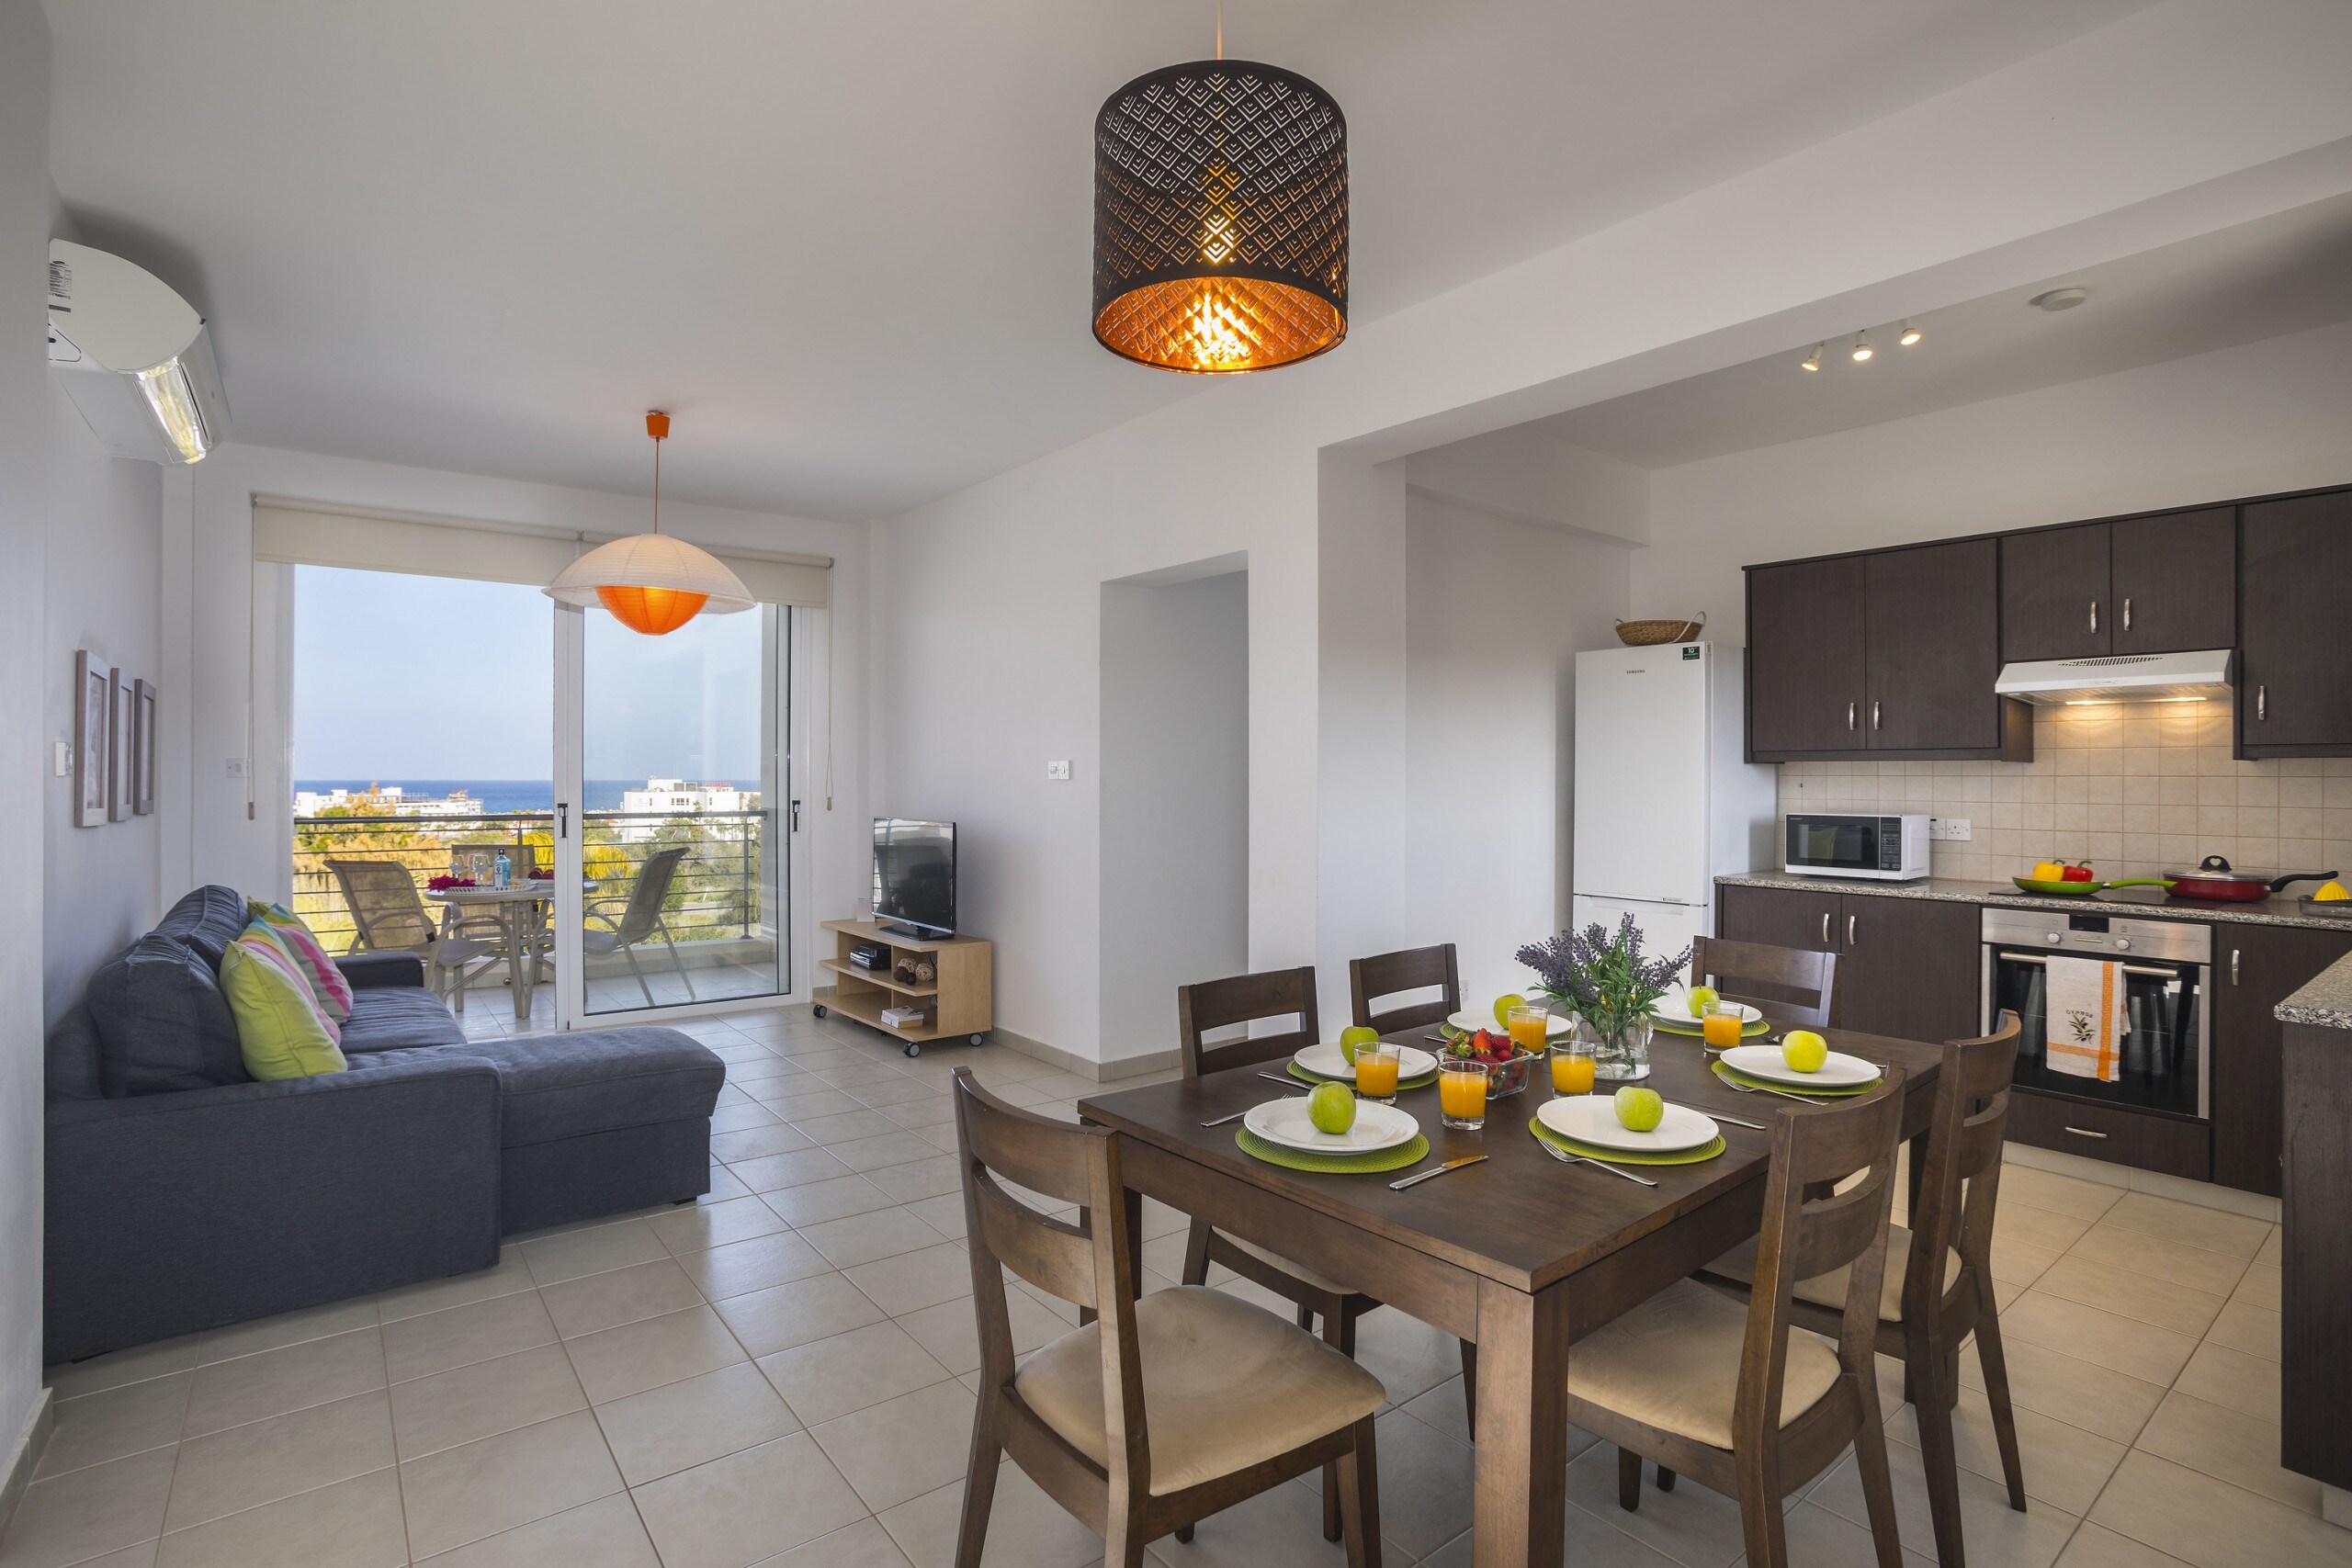 Property Image 1 - Comfortable Cozy Flat with Epic Views over Larnaca Bay